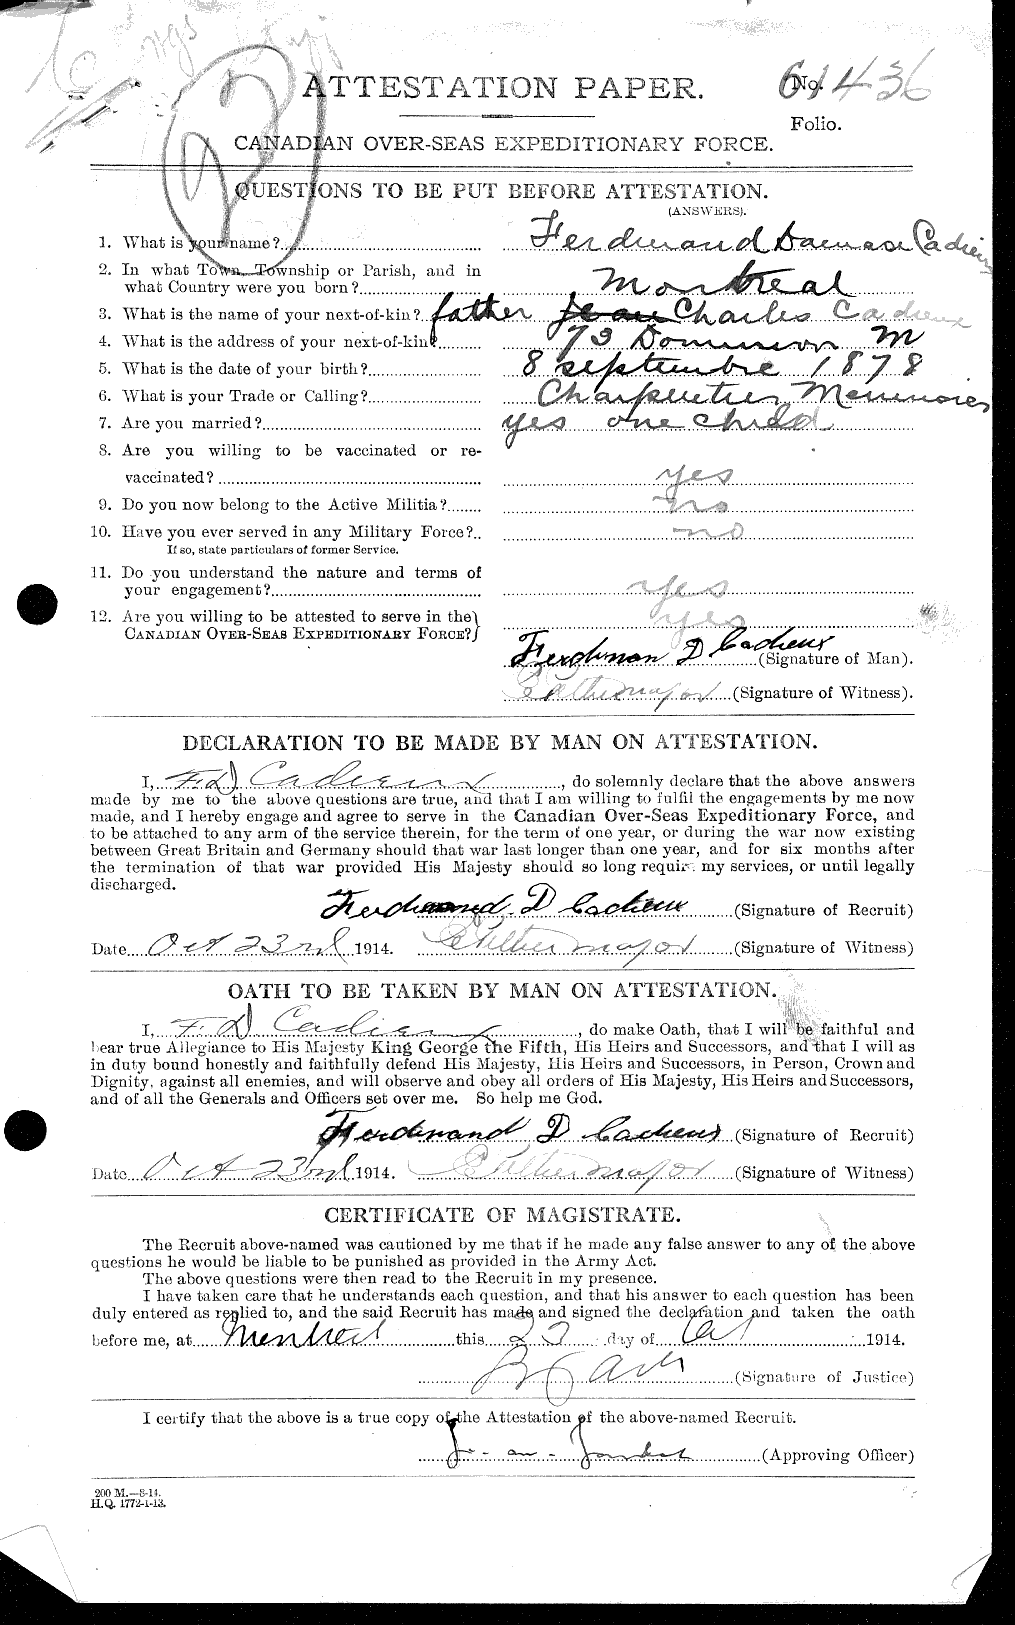 Personnel Records of the First World War - CEF 001562a